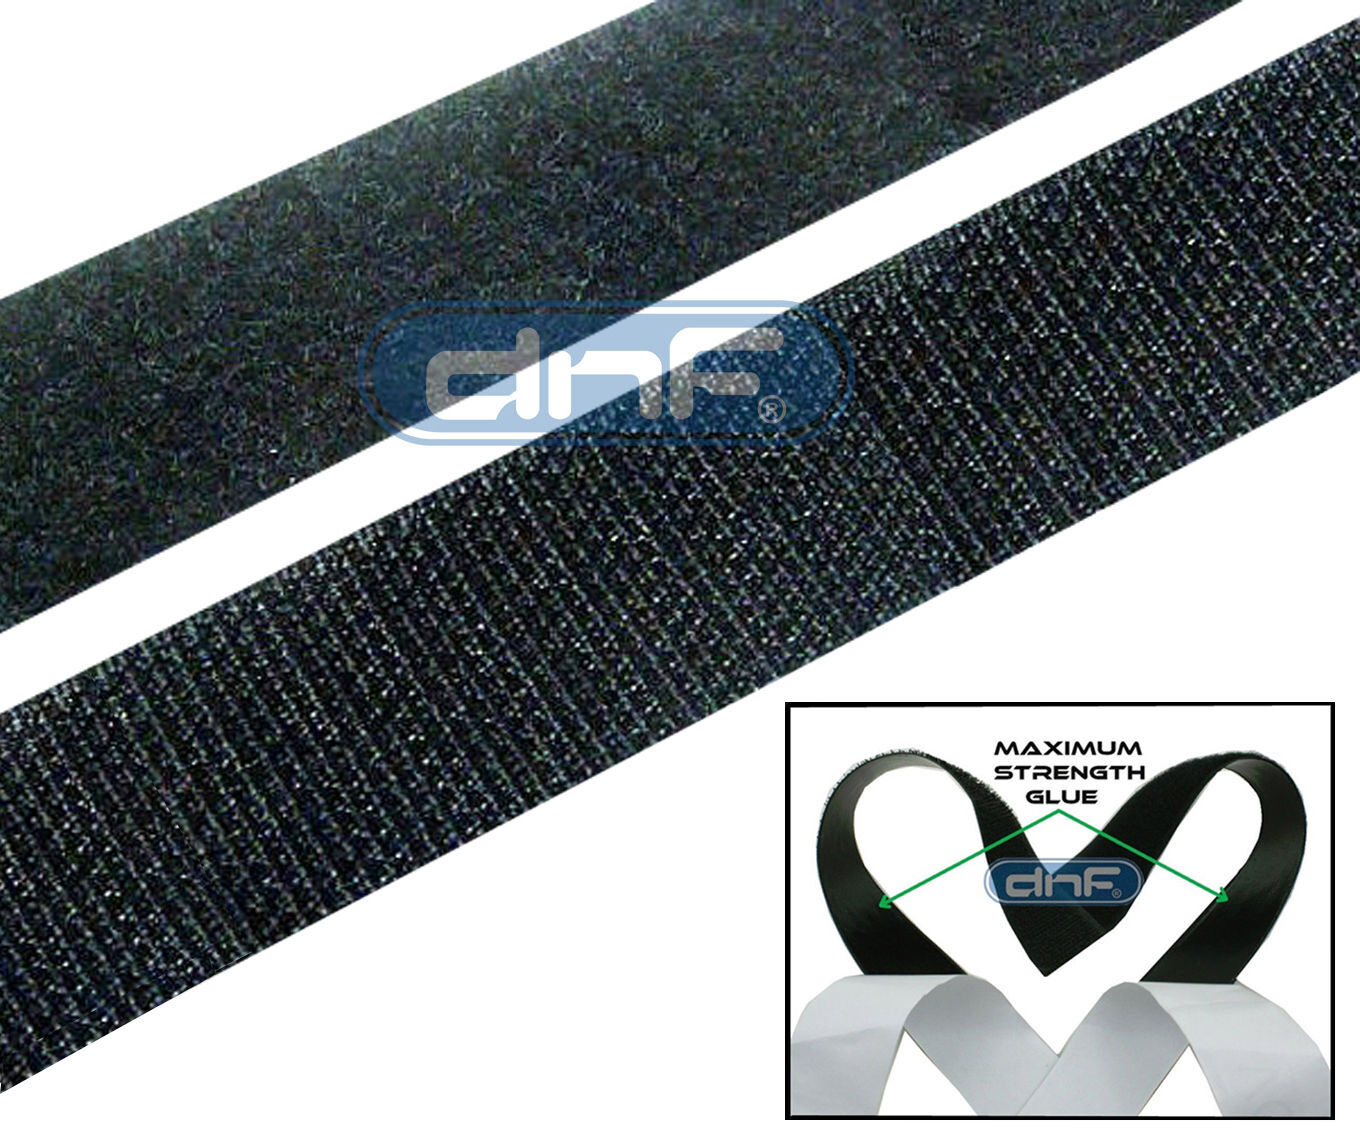 1" 5 Feet Black Self Adhesive Sticky Hook And Loop Tape- Free Same Day Shipping!